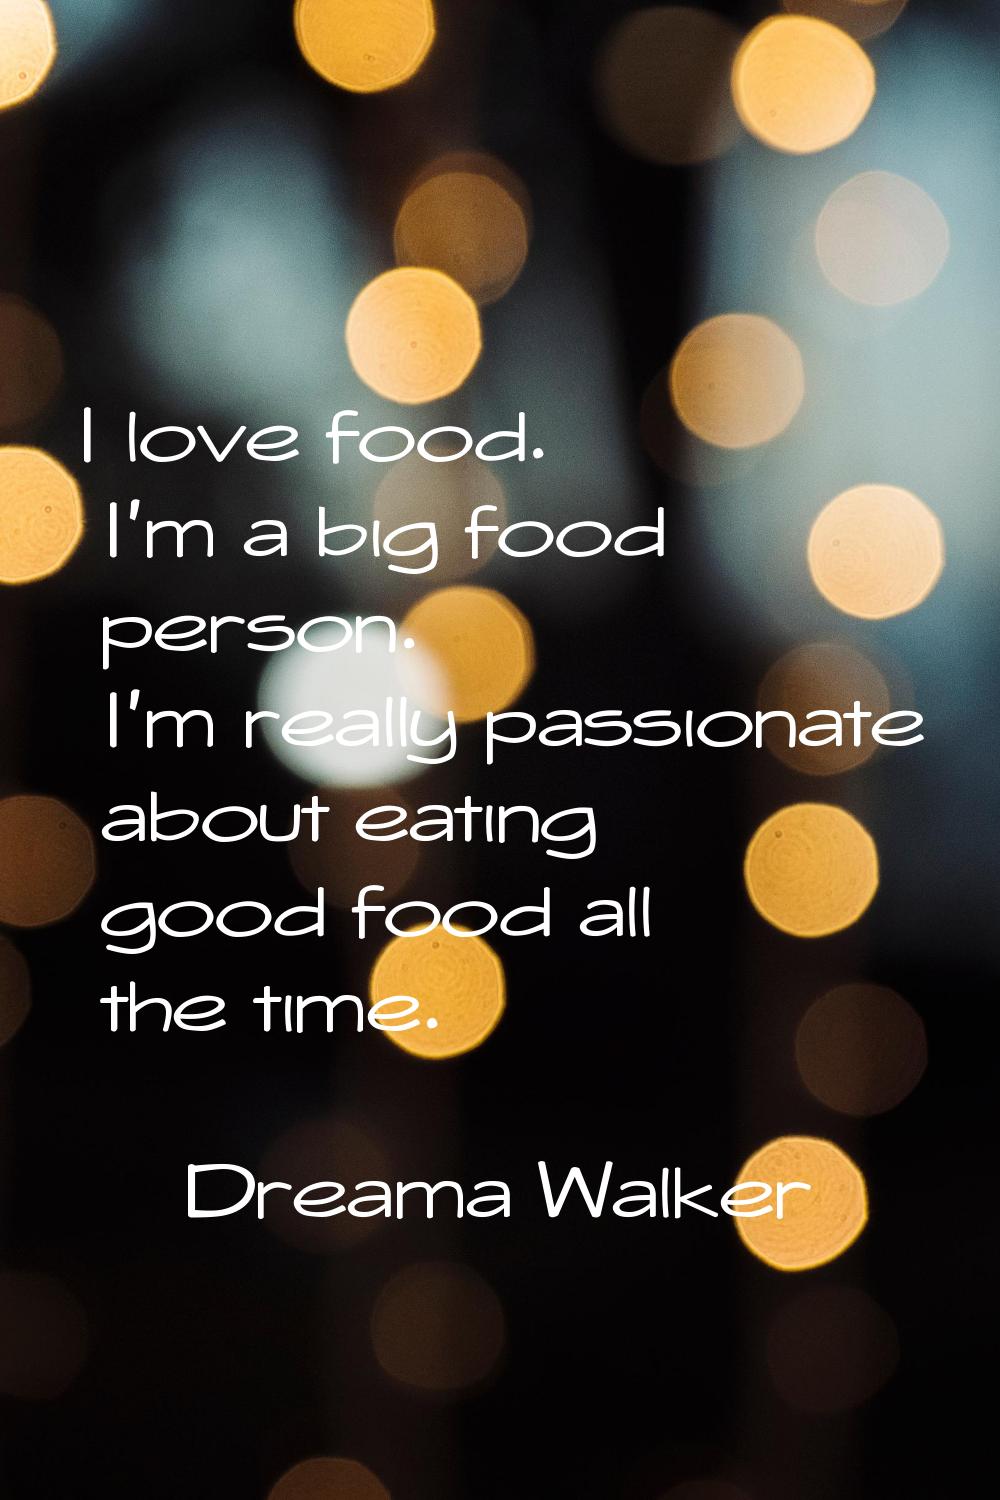 I love food. I'm a big food person. I'm really passionate about eating good food all the time.